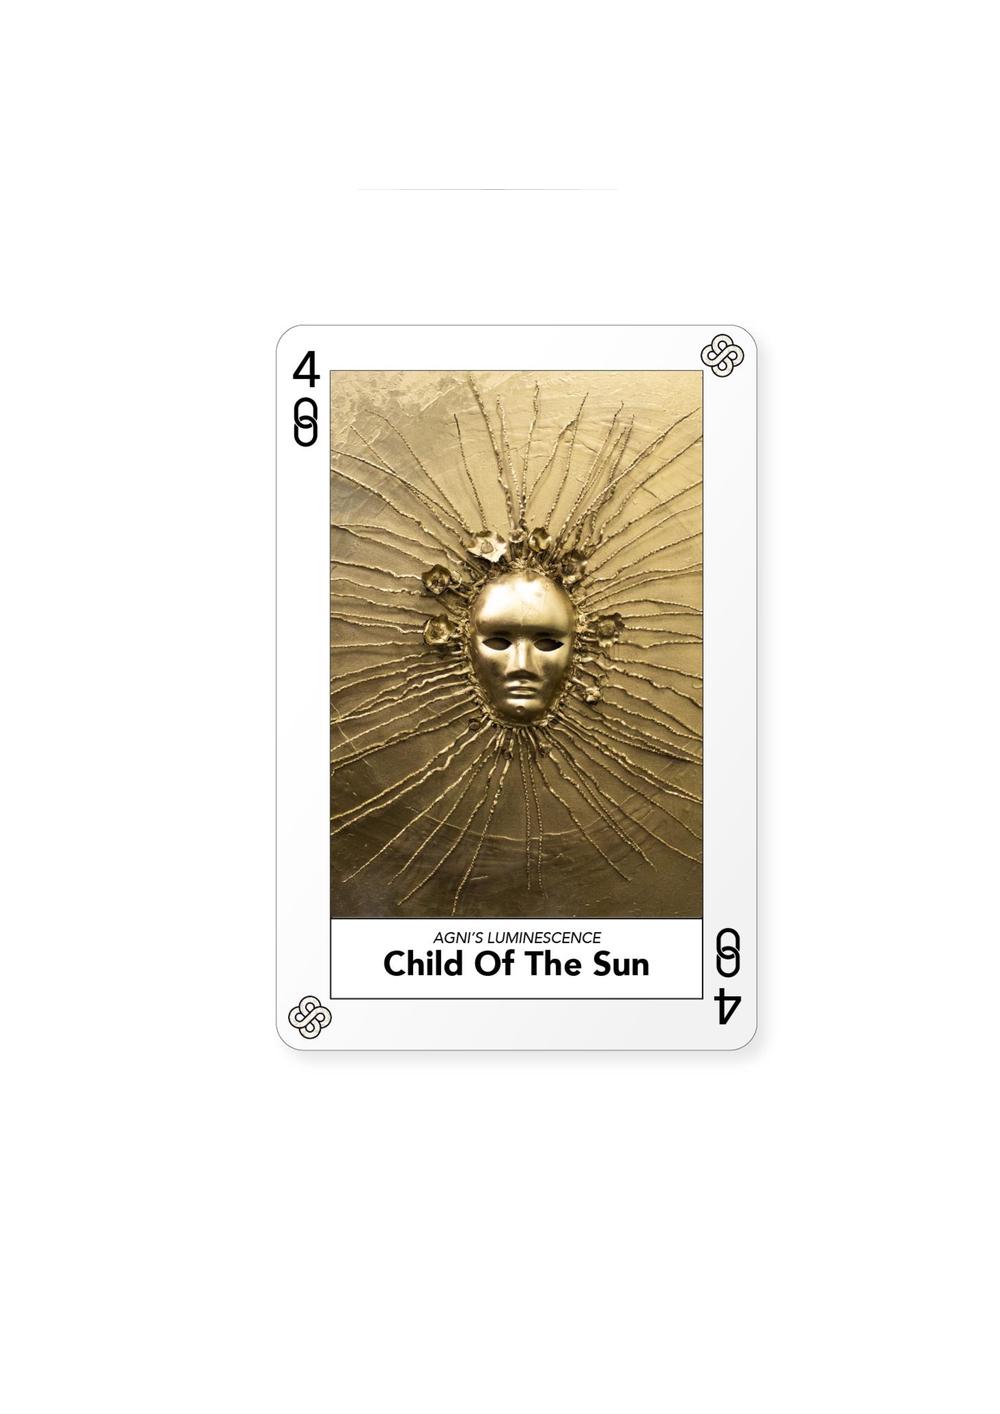 Certificate of Authenticity and Consignment - Child of the Sun